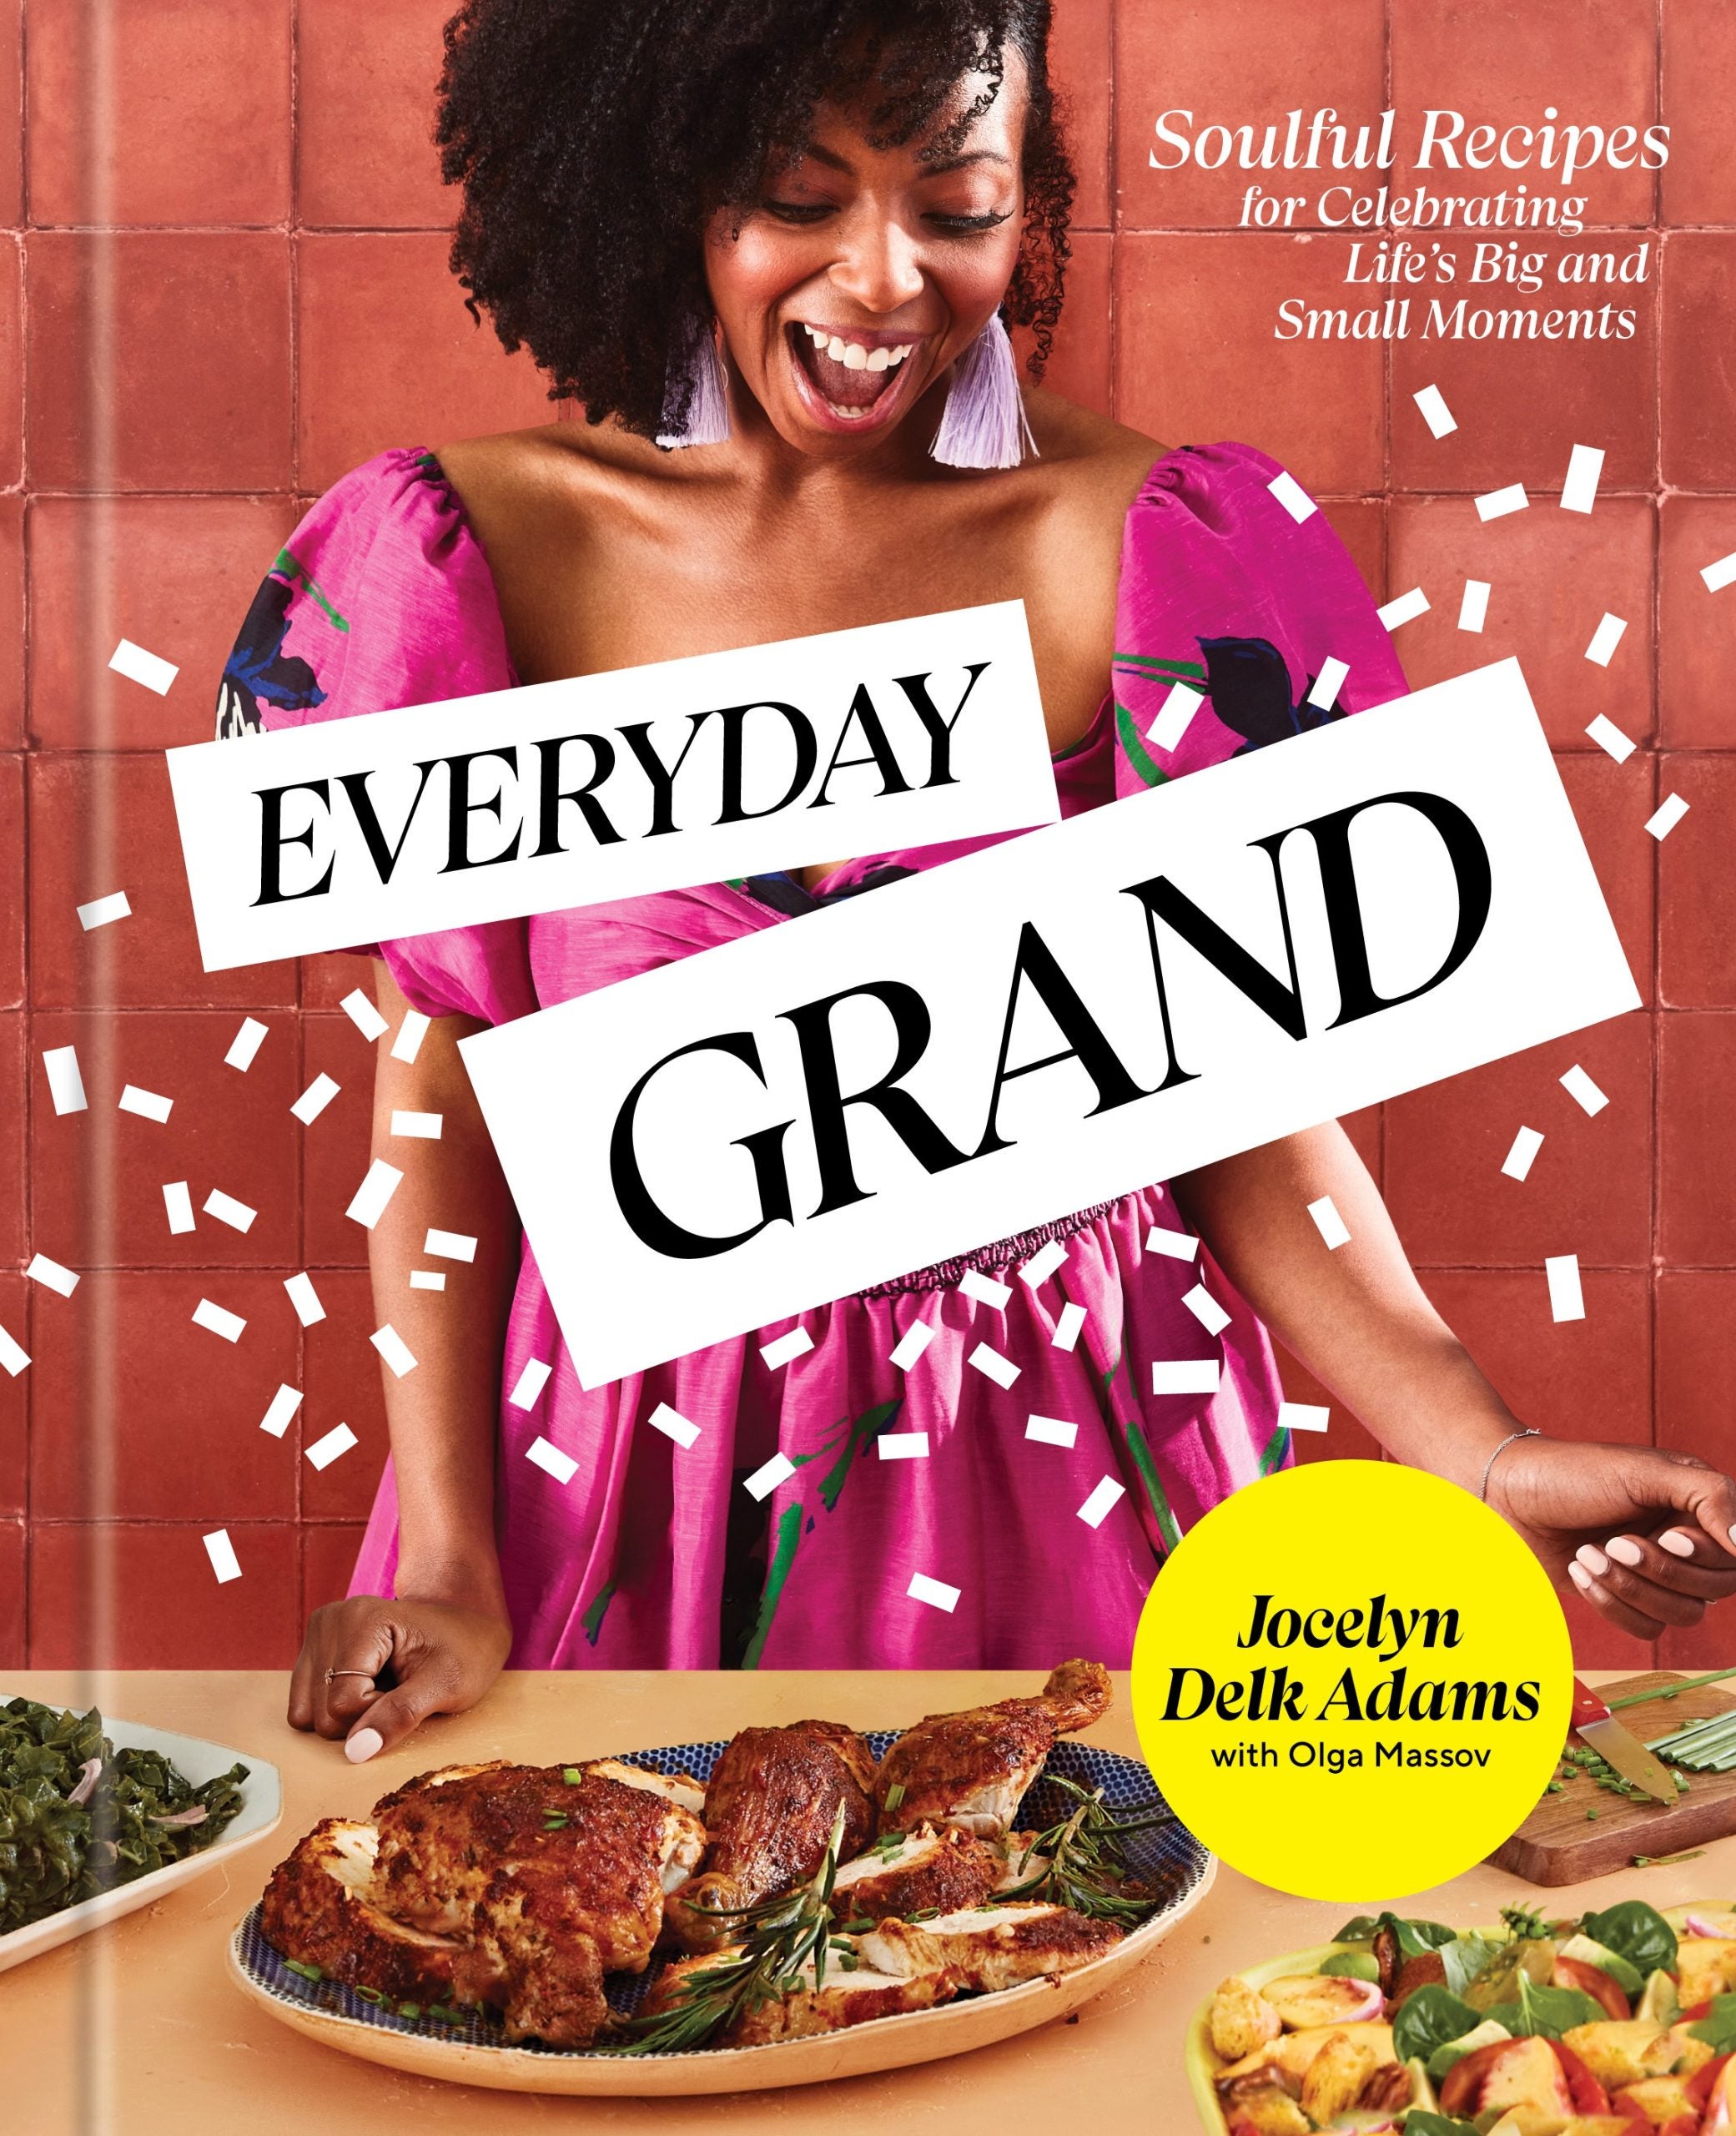 Jocelyn Delk Adams Is Bringing Joy To The Kitchen With Her New Cookbook ‘Everyday Grand’